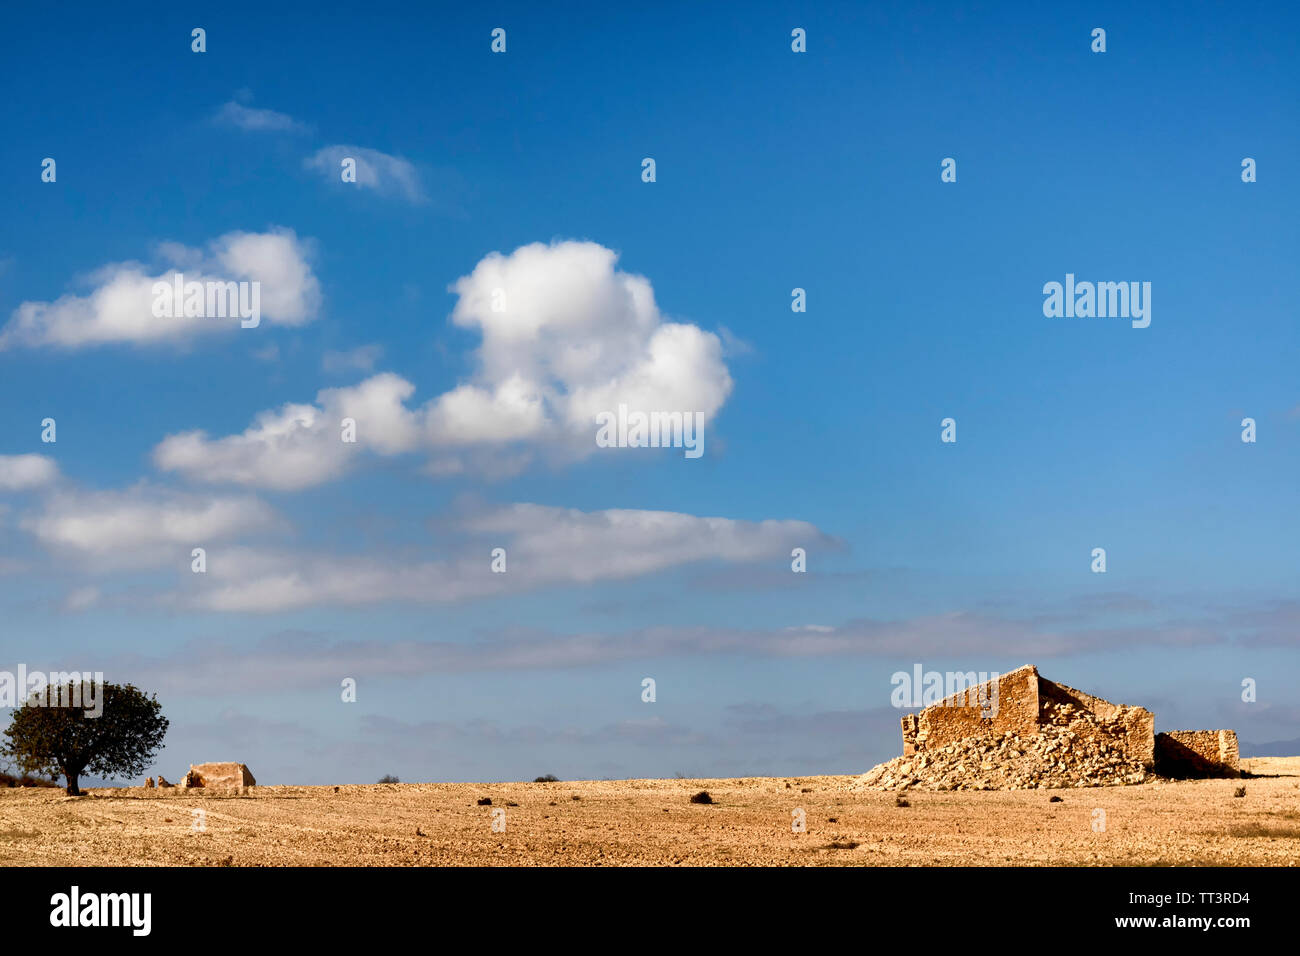 An arid Spanish landscape with a ruined abandoned house and solitary tree Stock Photo